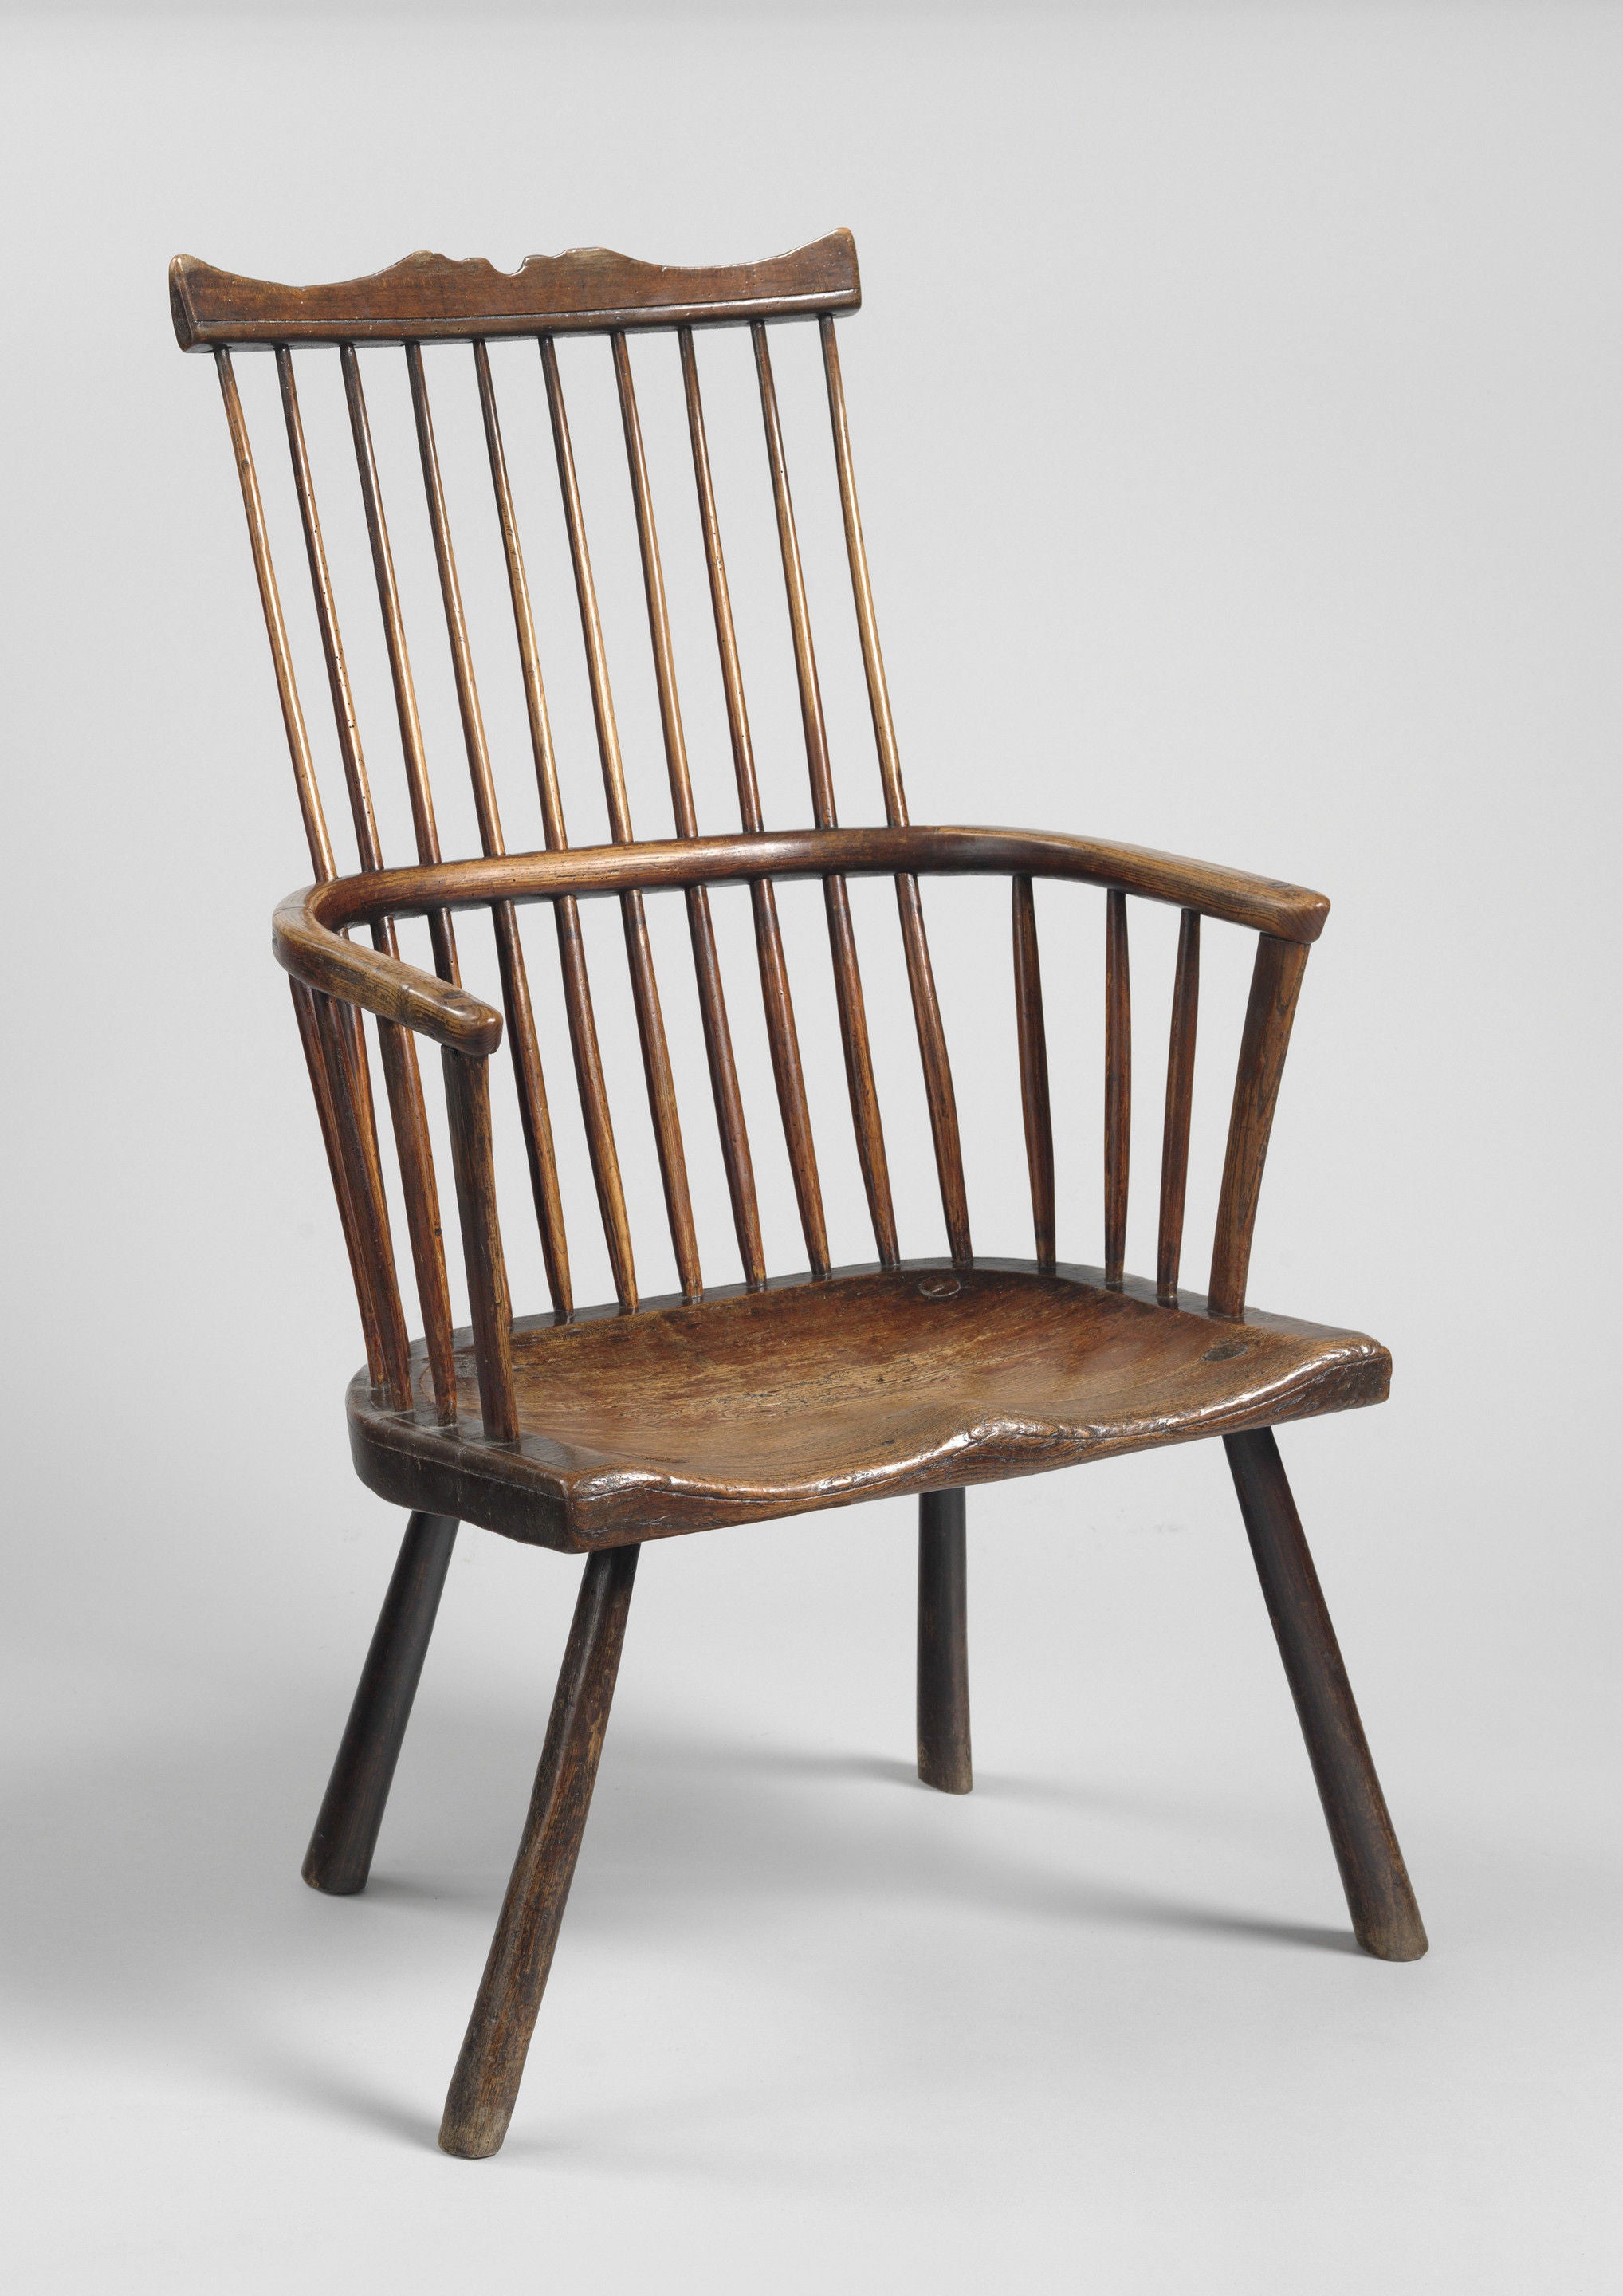 Documentary Early Primitive Comb Back Windsor Armchair